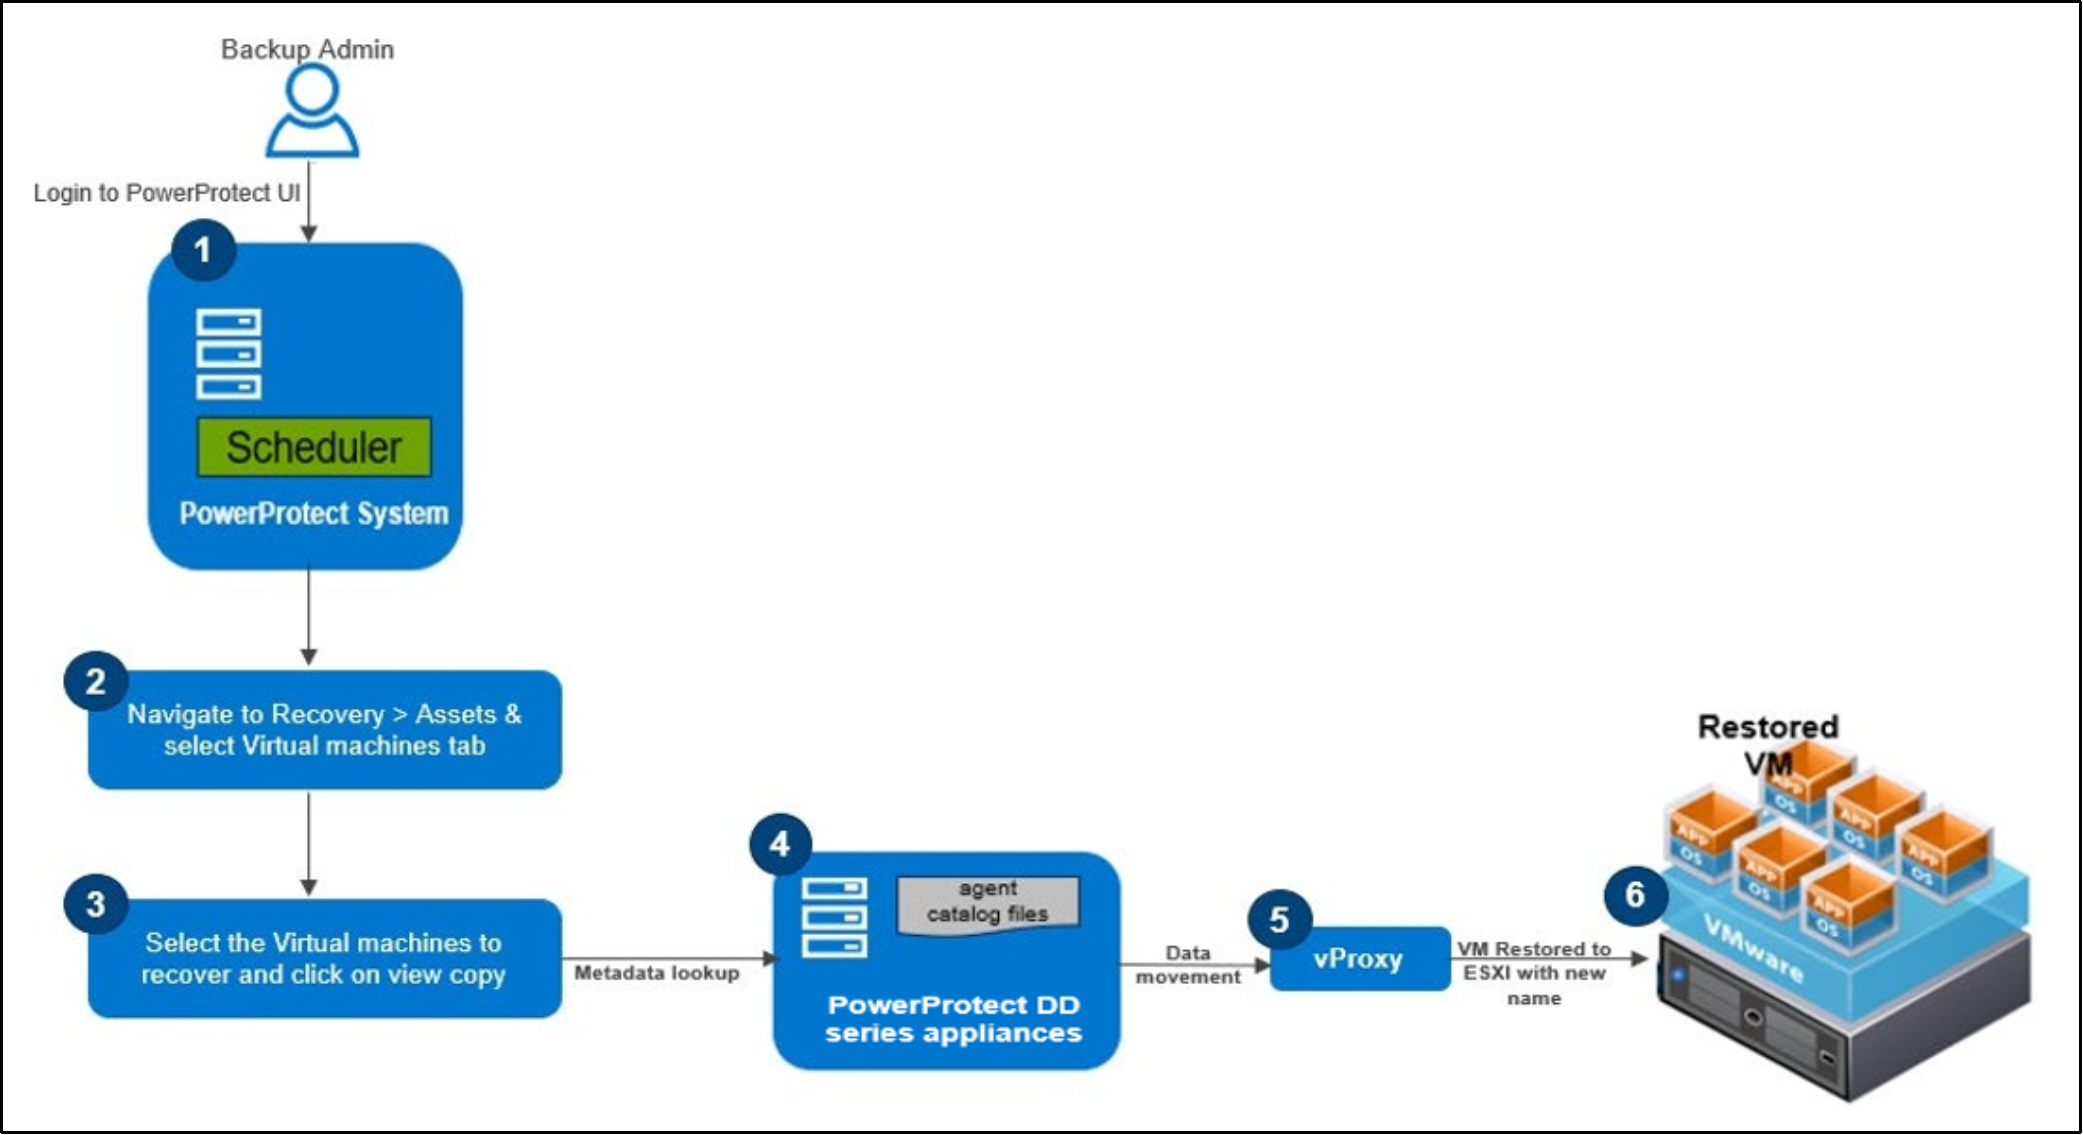 This Diagram depicts workflow of Virtual Machine recovery